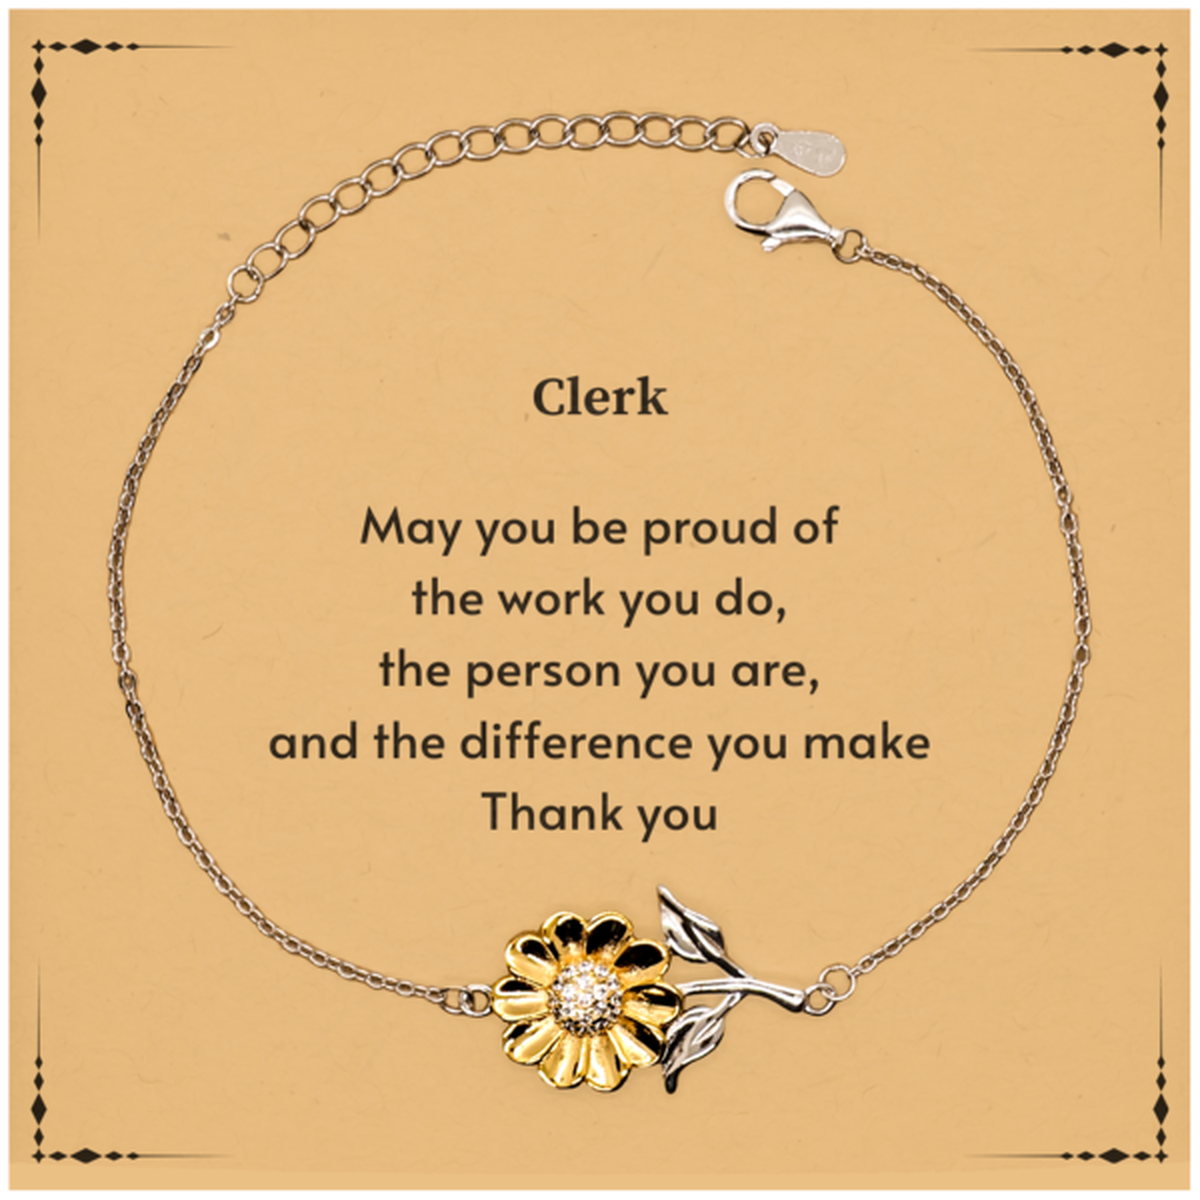 Heartwarming Sunflower Bracelet Retirement Coworkers Gifts for Clerk, Clerk May You be proud of the work you do, the person you are Gifts for Boss Men Women Friends